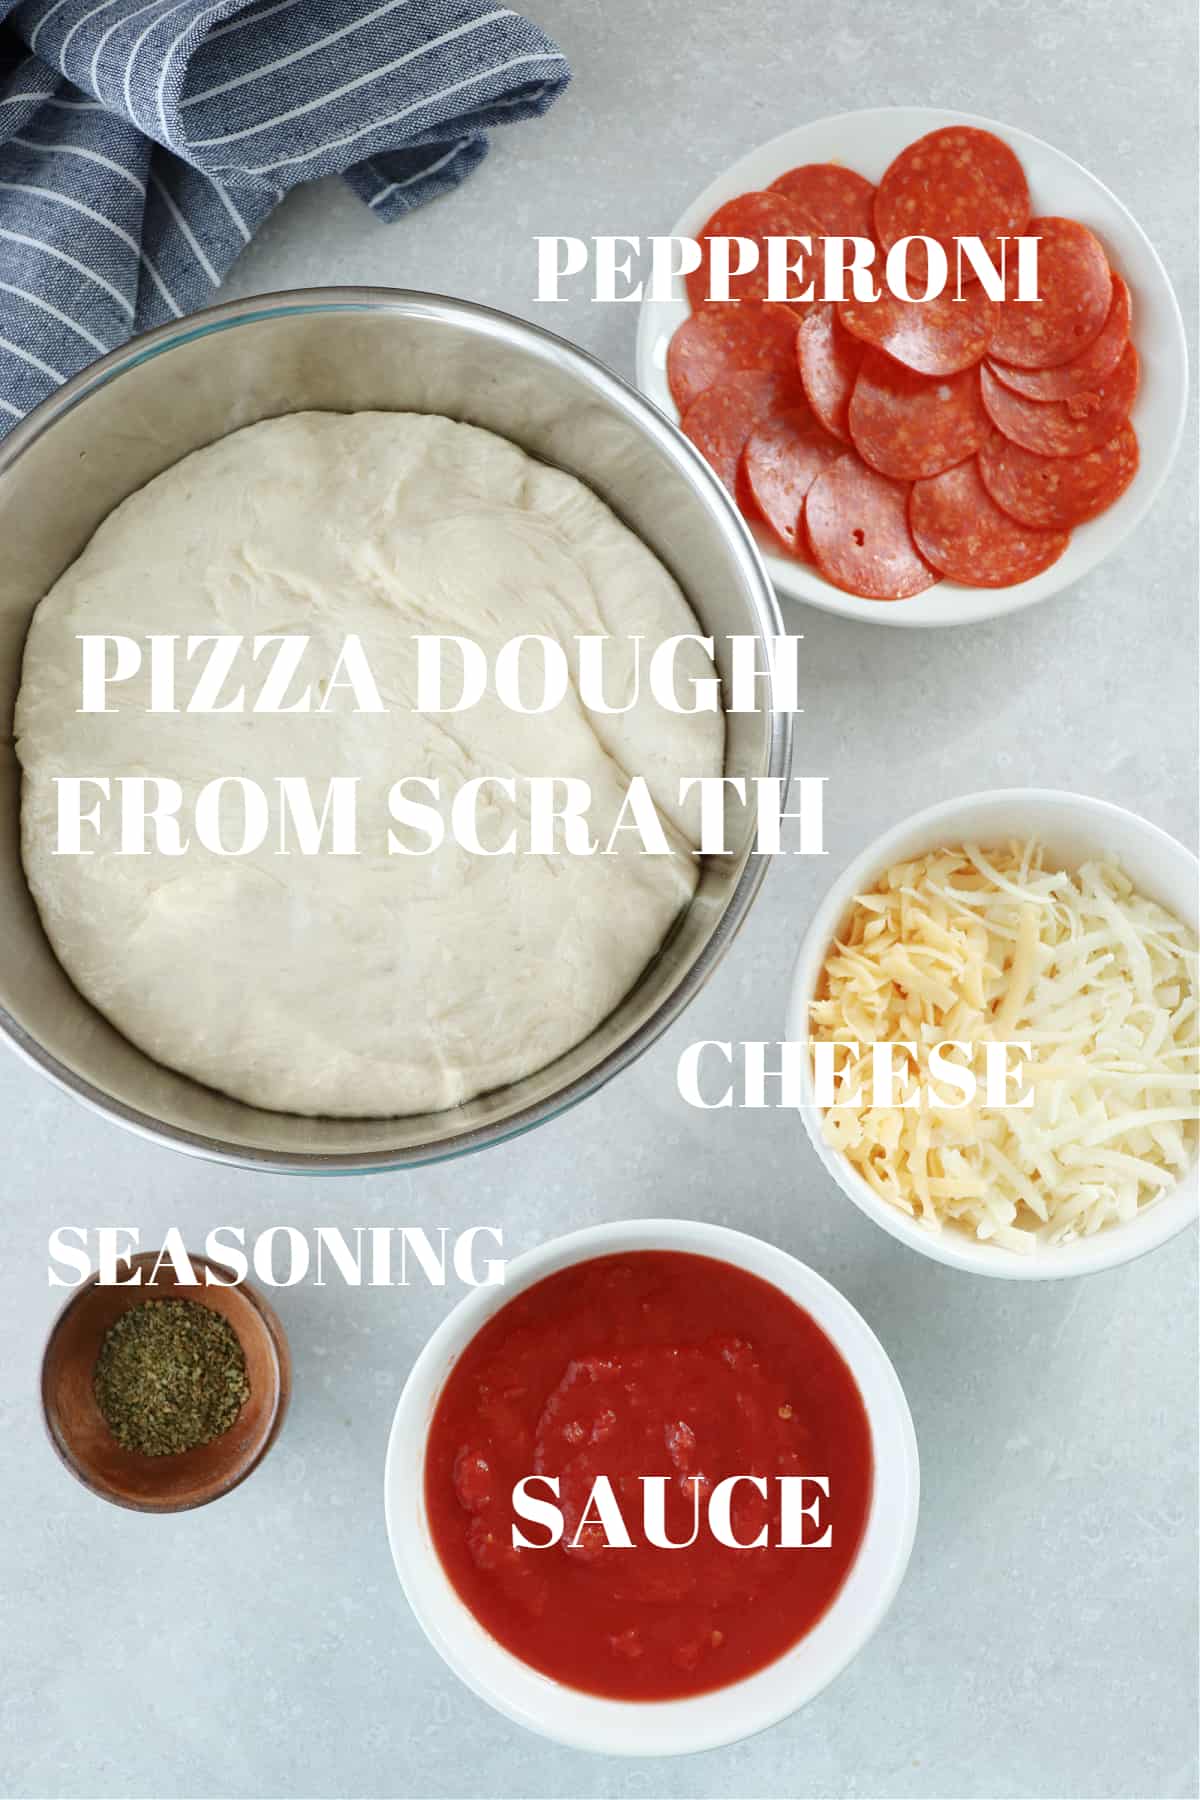 Pizza dough, tomato sauce, cheese, pepperoni and seasoning in bowls on a gray board.